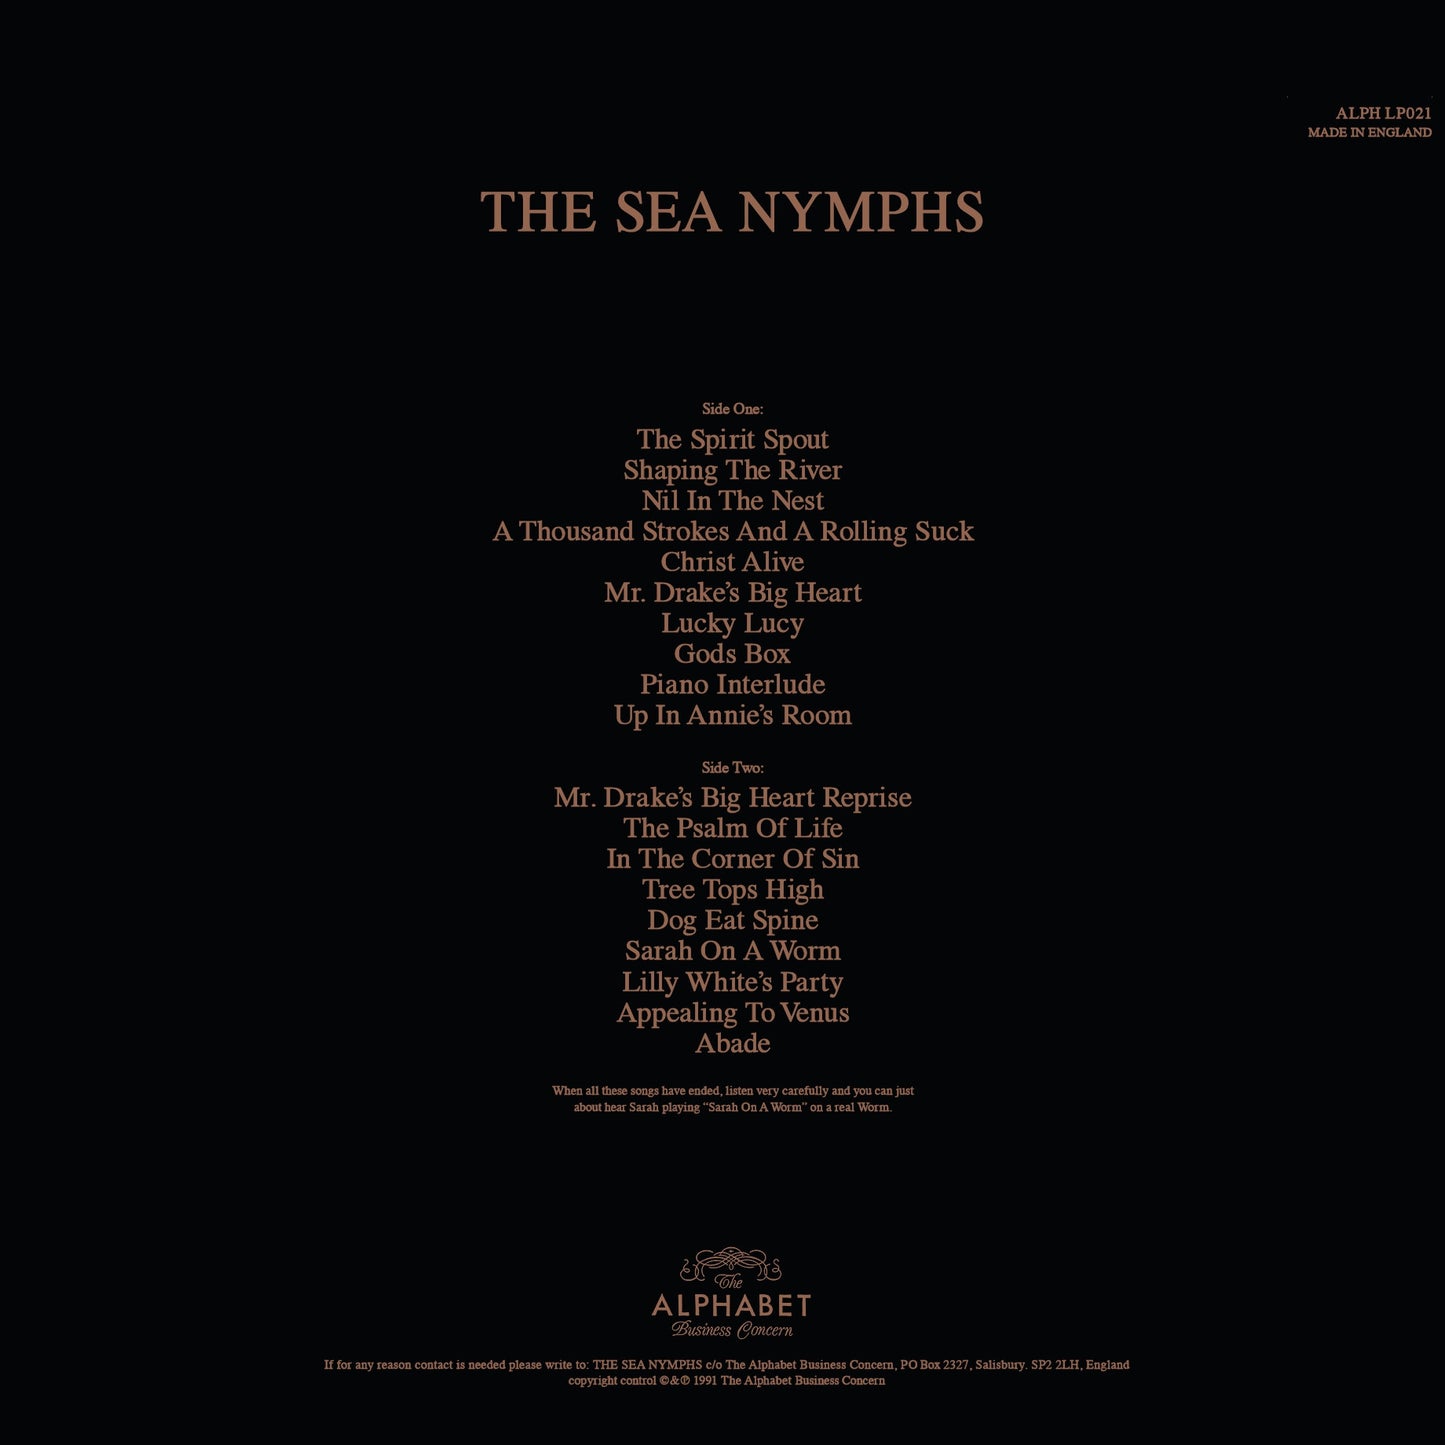 The Sea Nymphs: The Sea Nymphs: LP